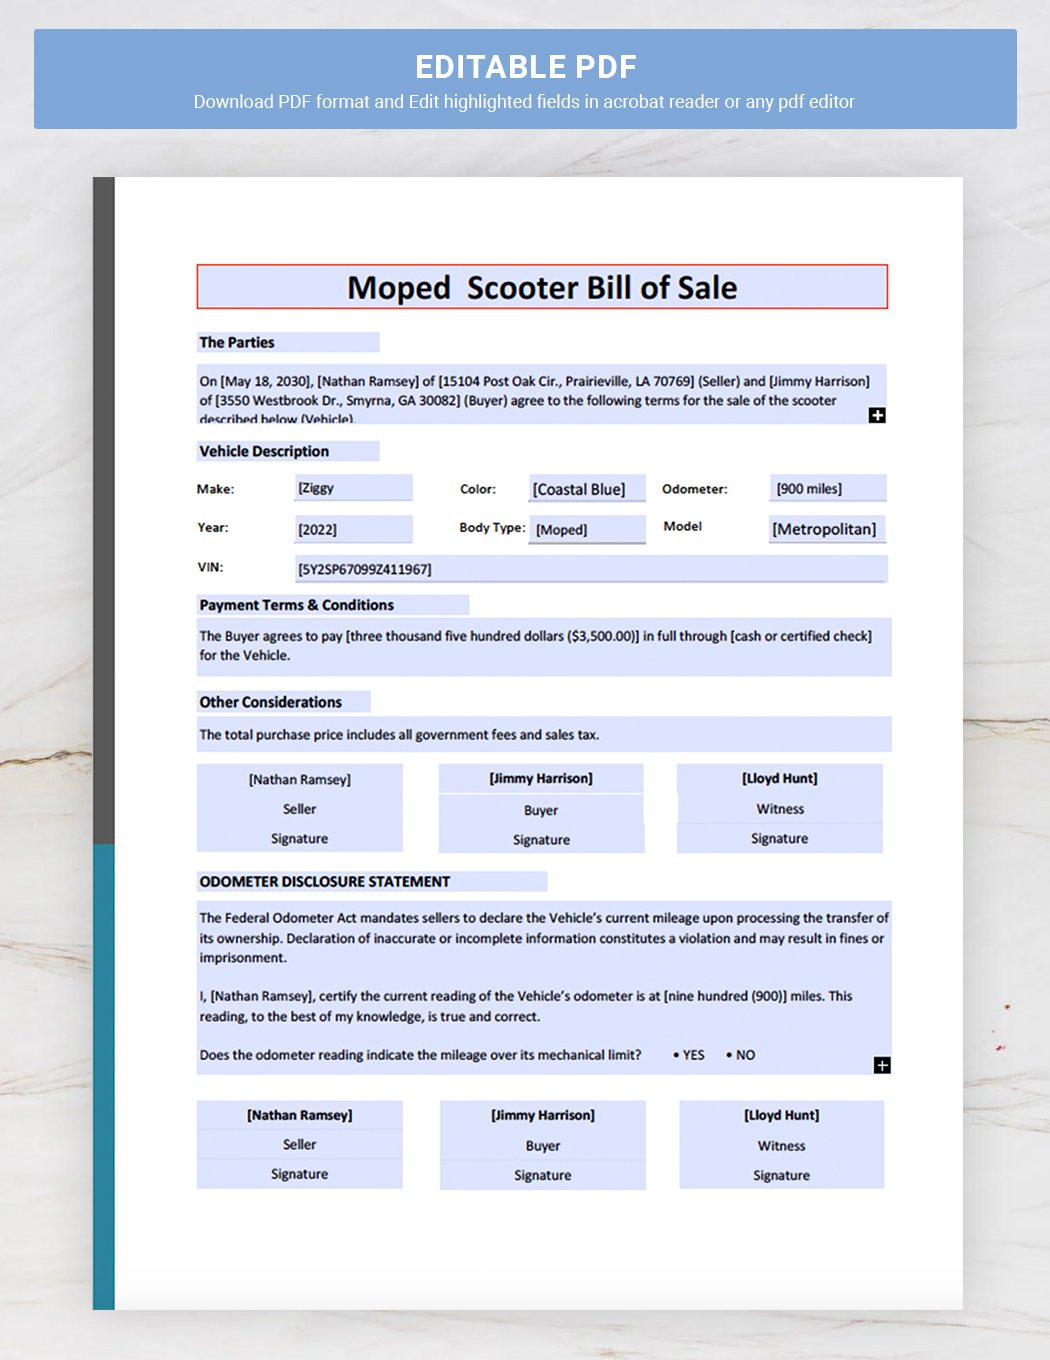 Moped / Scooter Bill of Sale Template